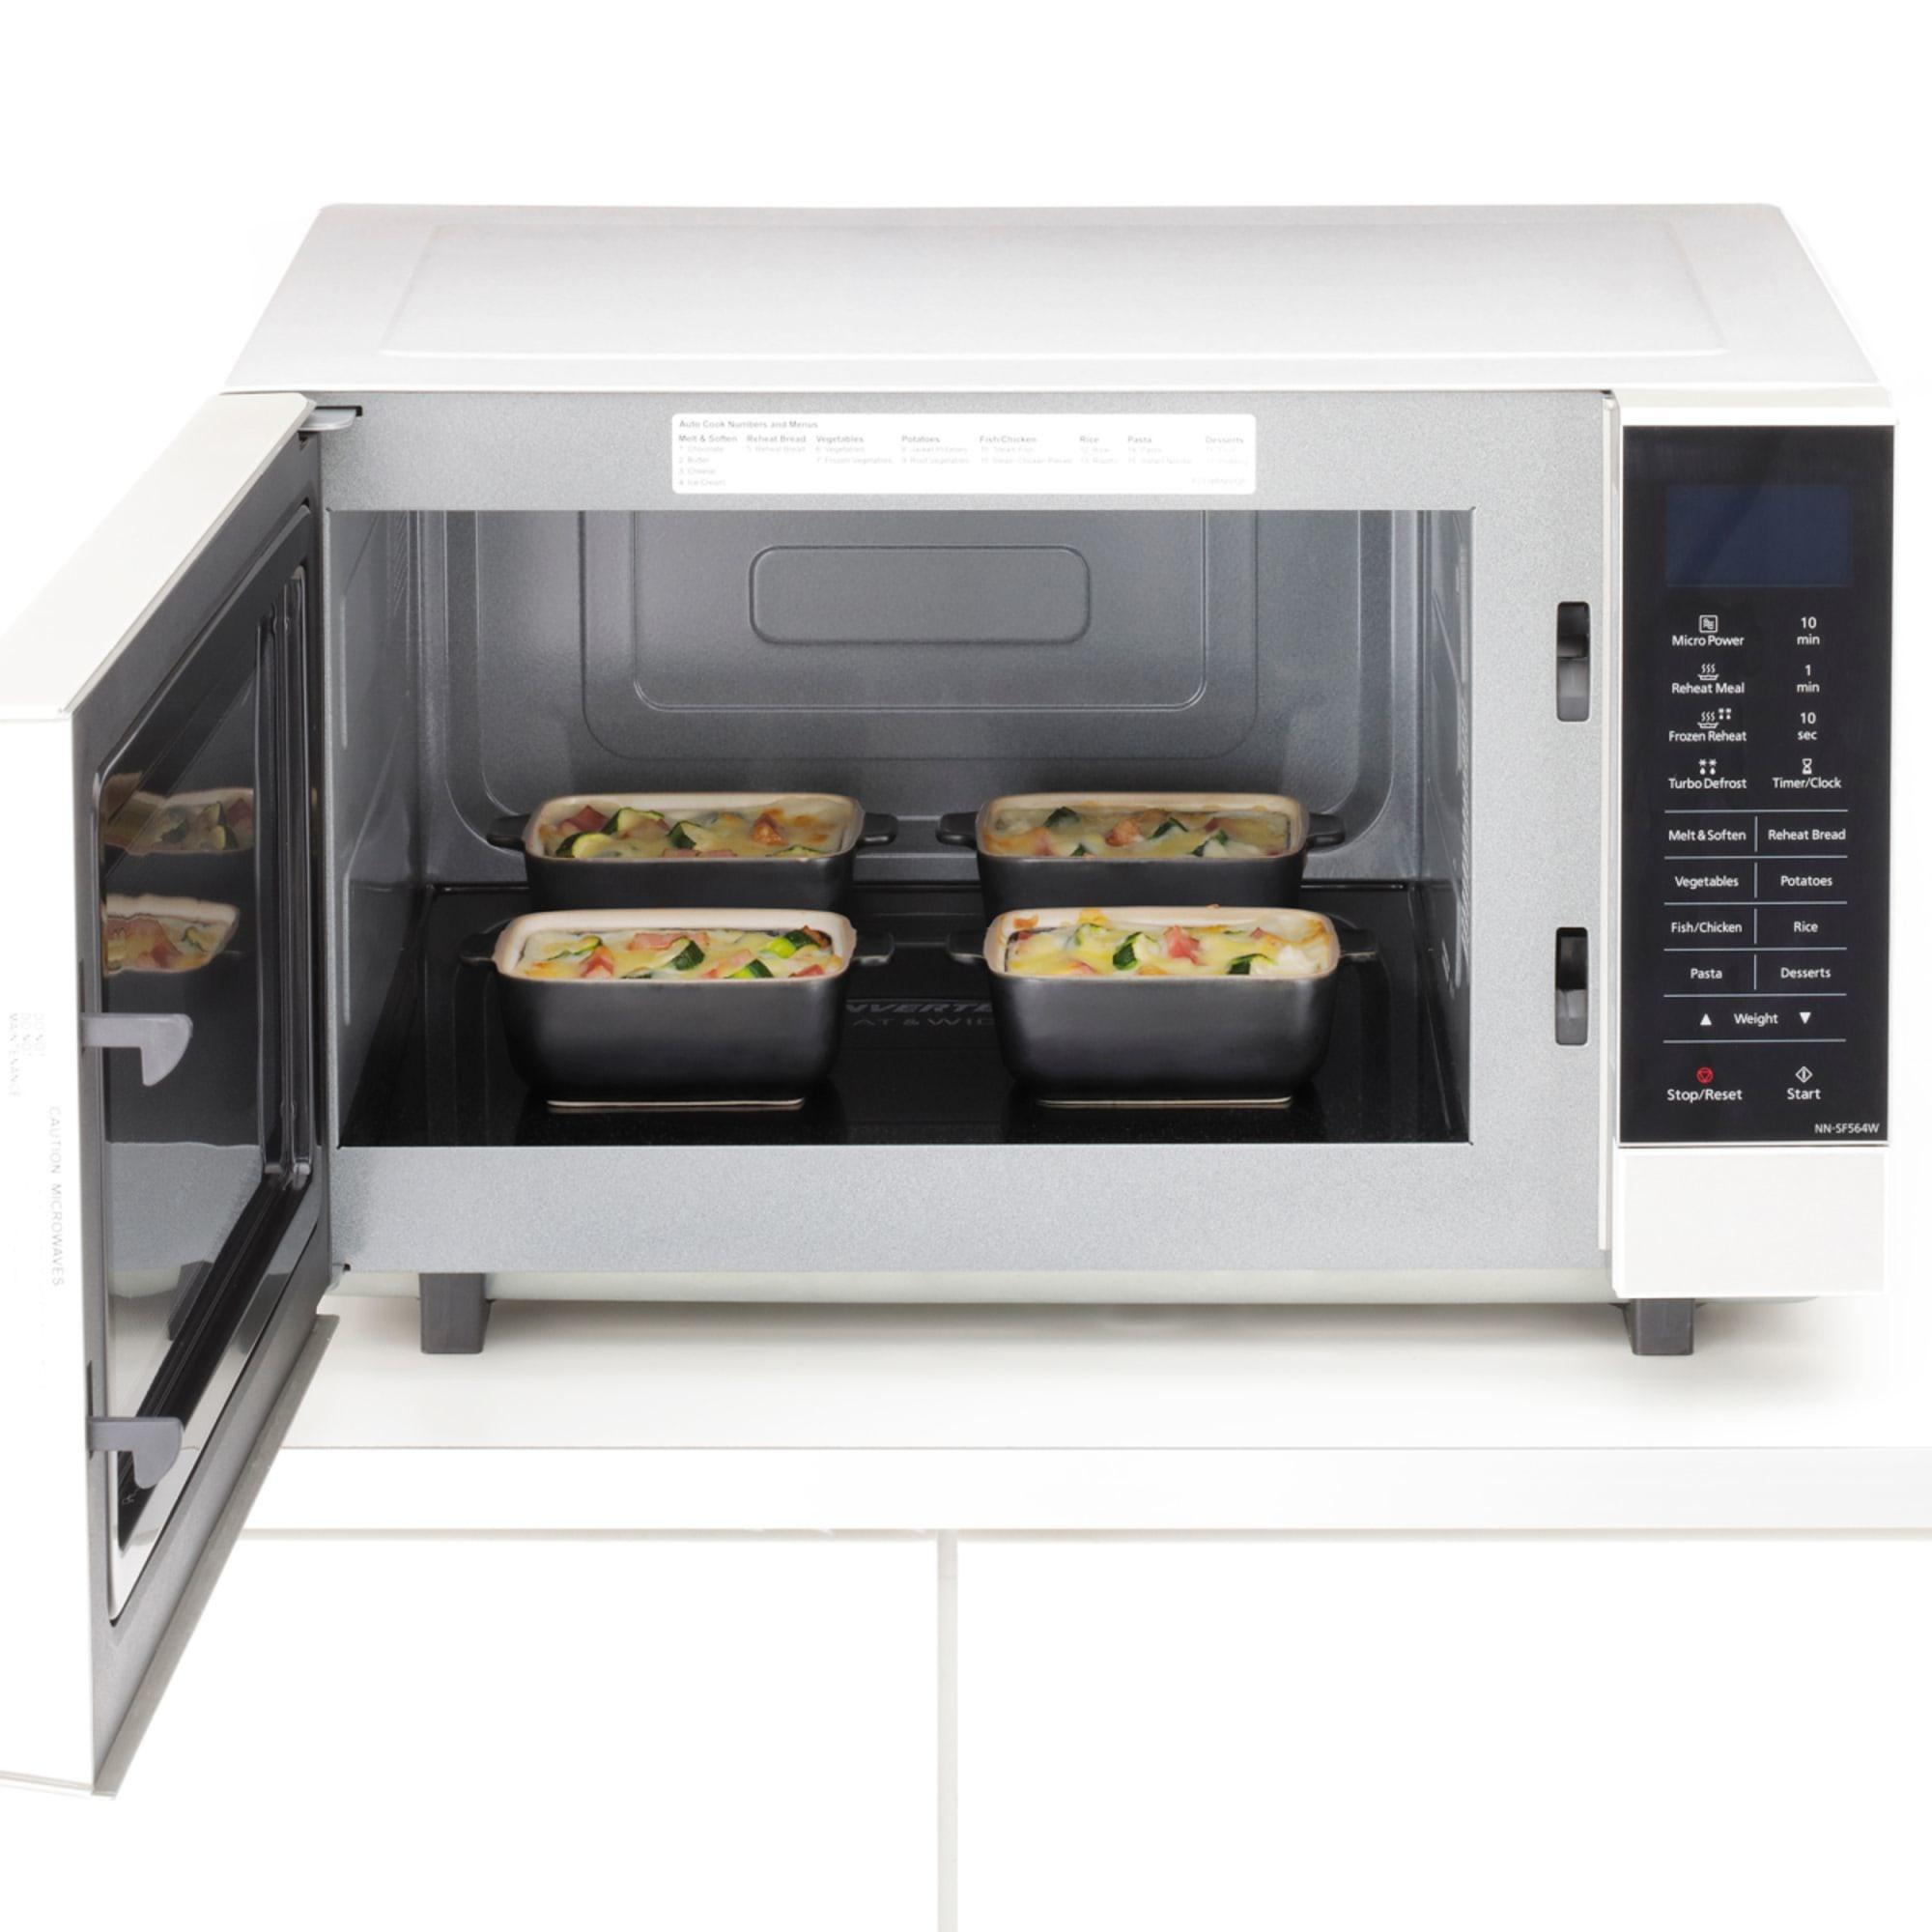 Panasonic Flatbed Microwave Oven 27L White Image 3